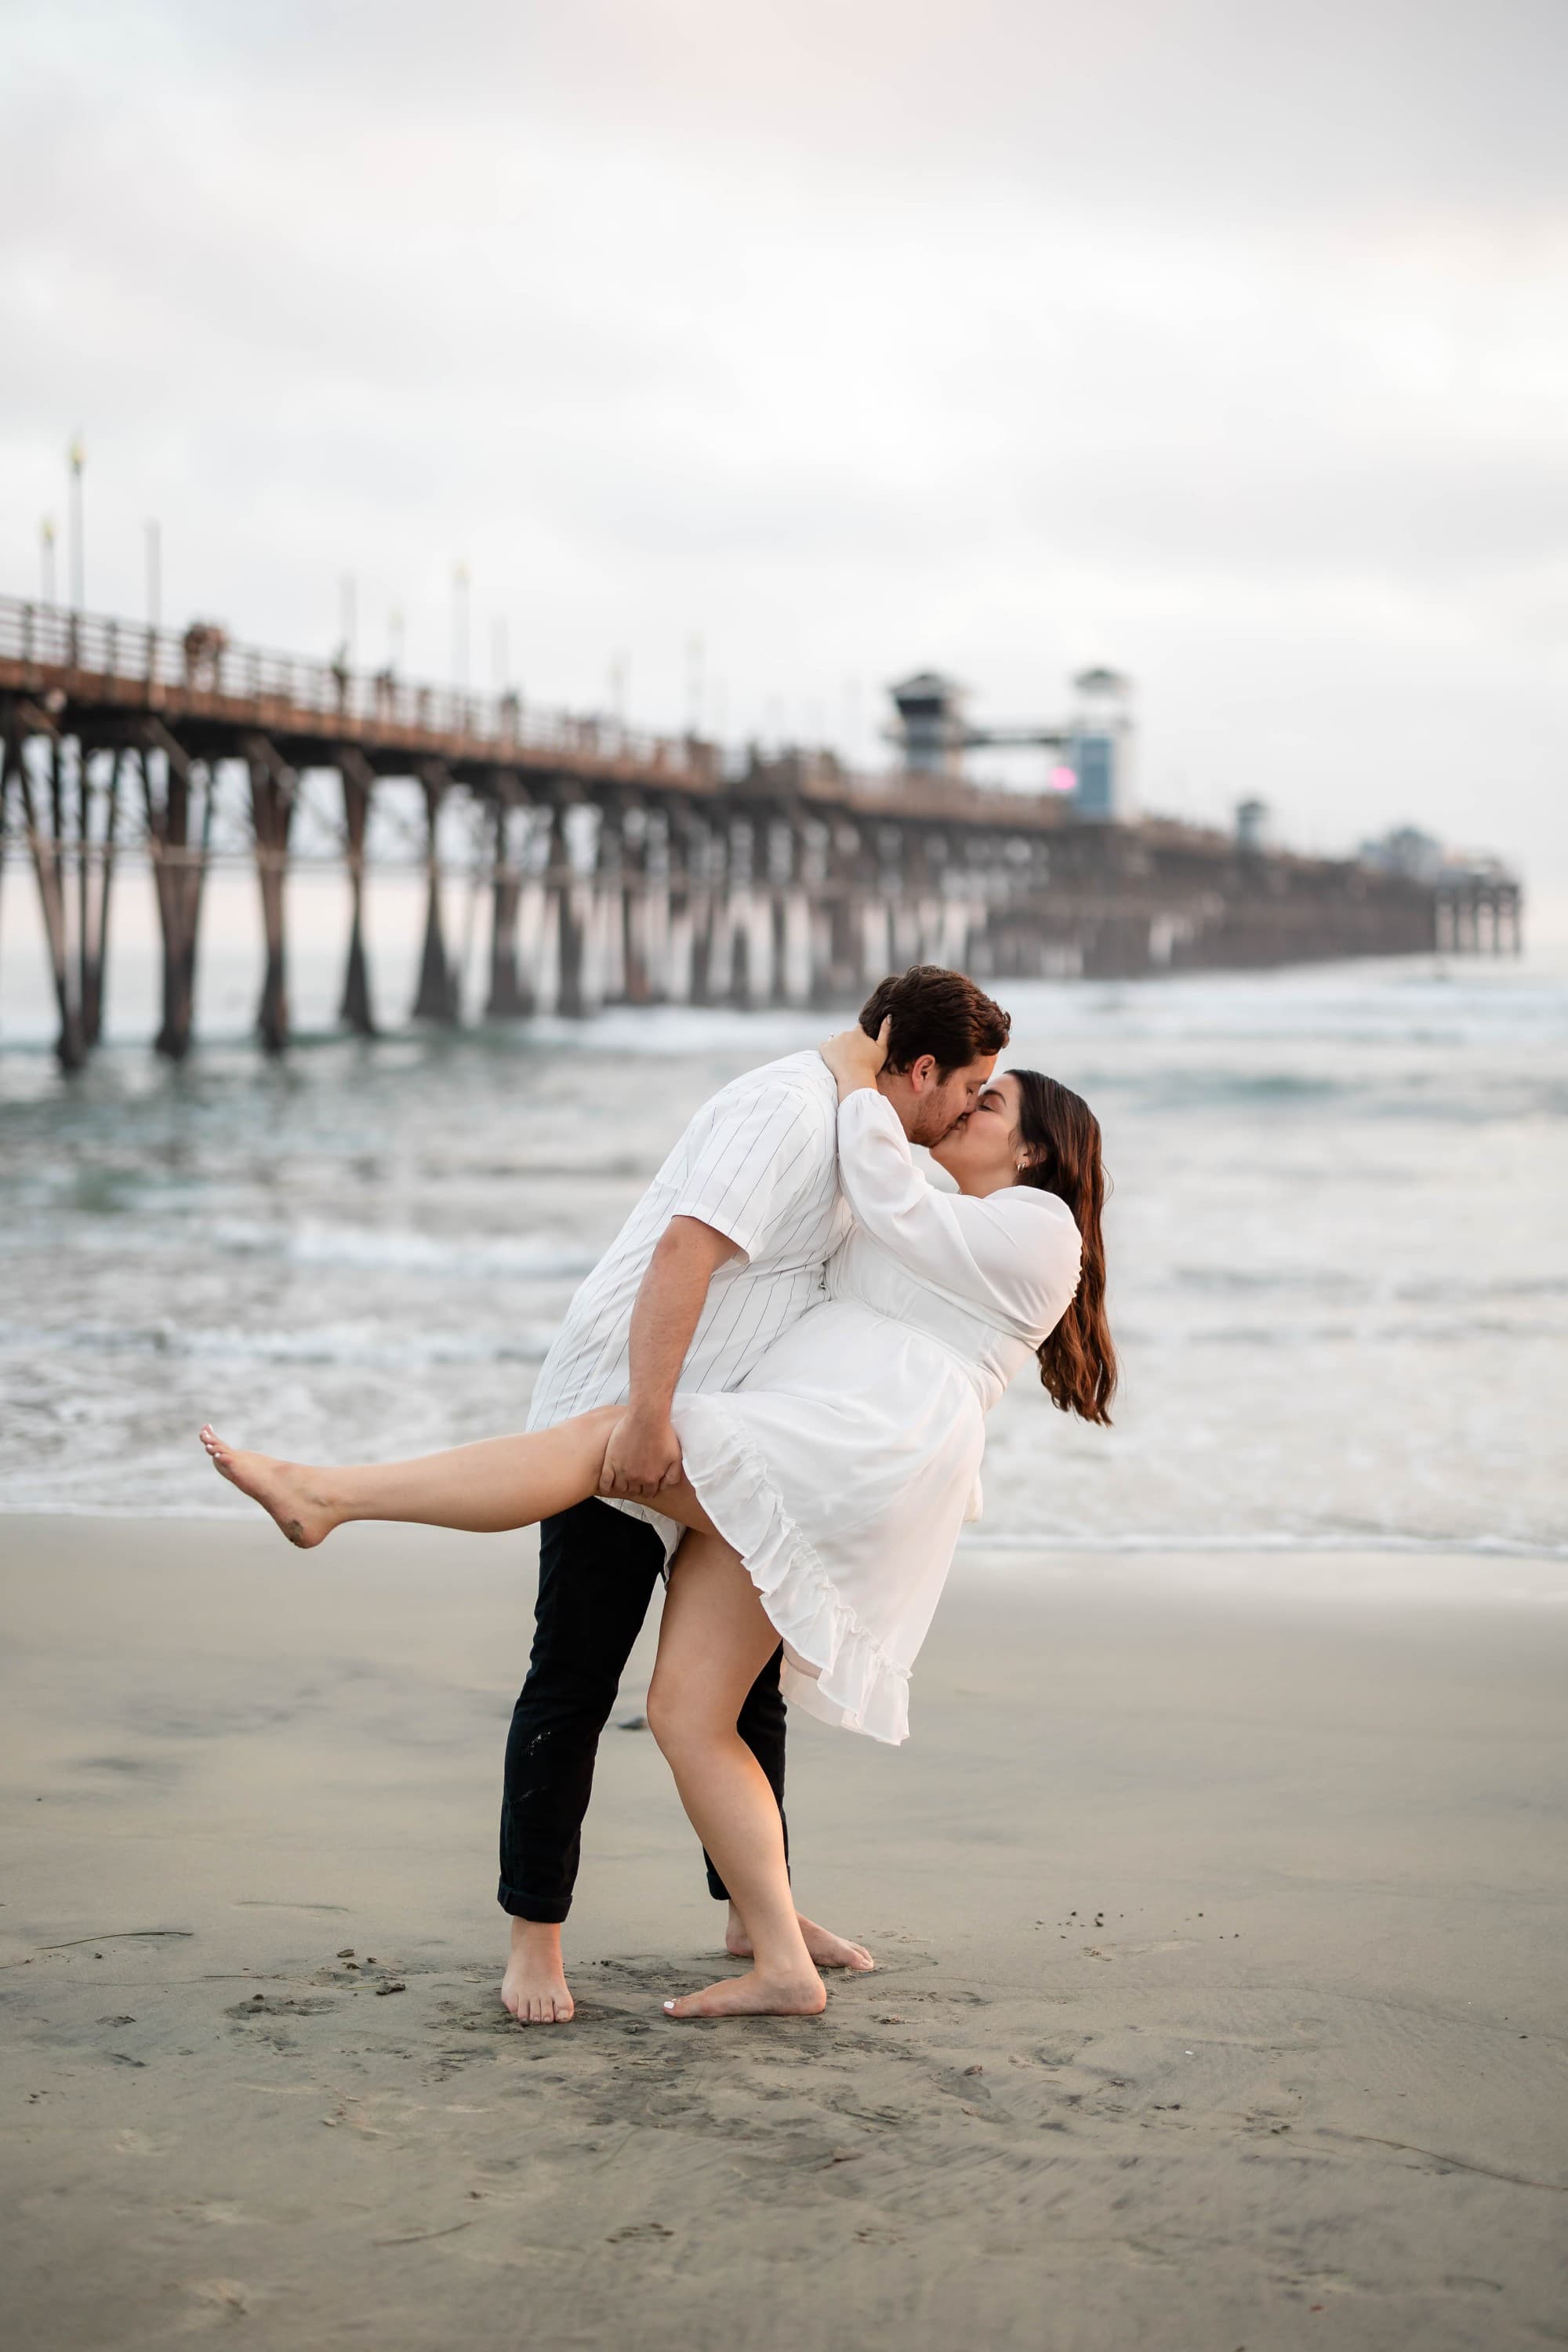 The Best Engagement Session Locations In San Diego